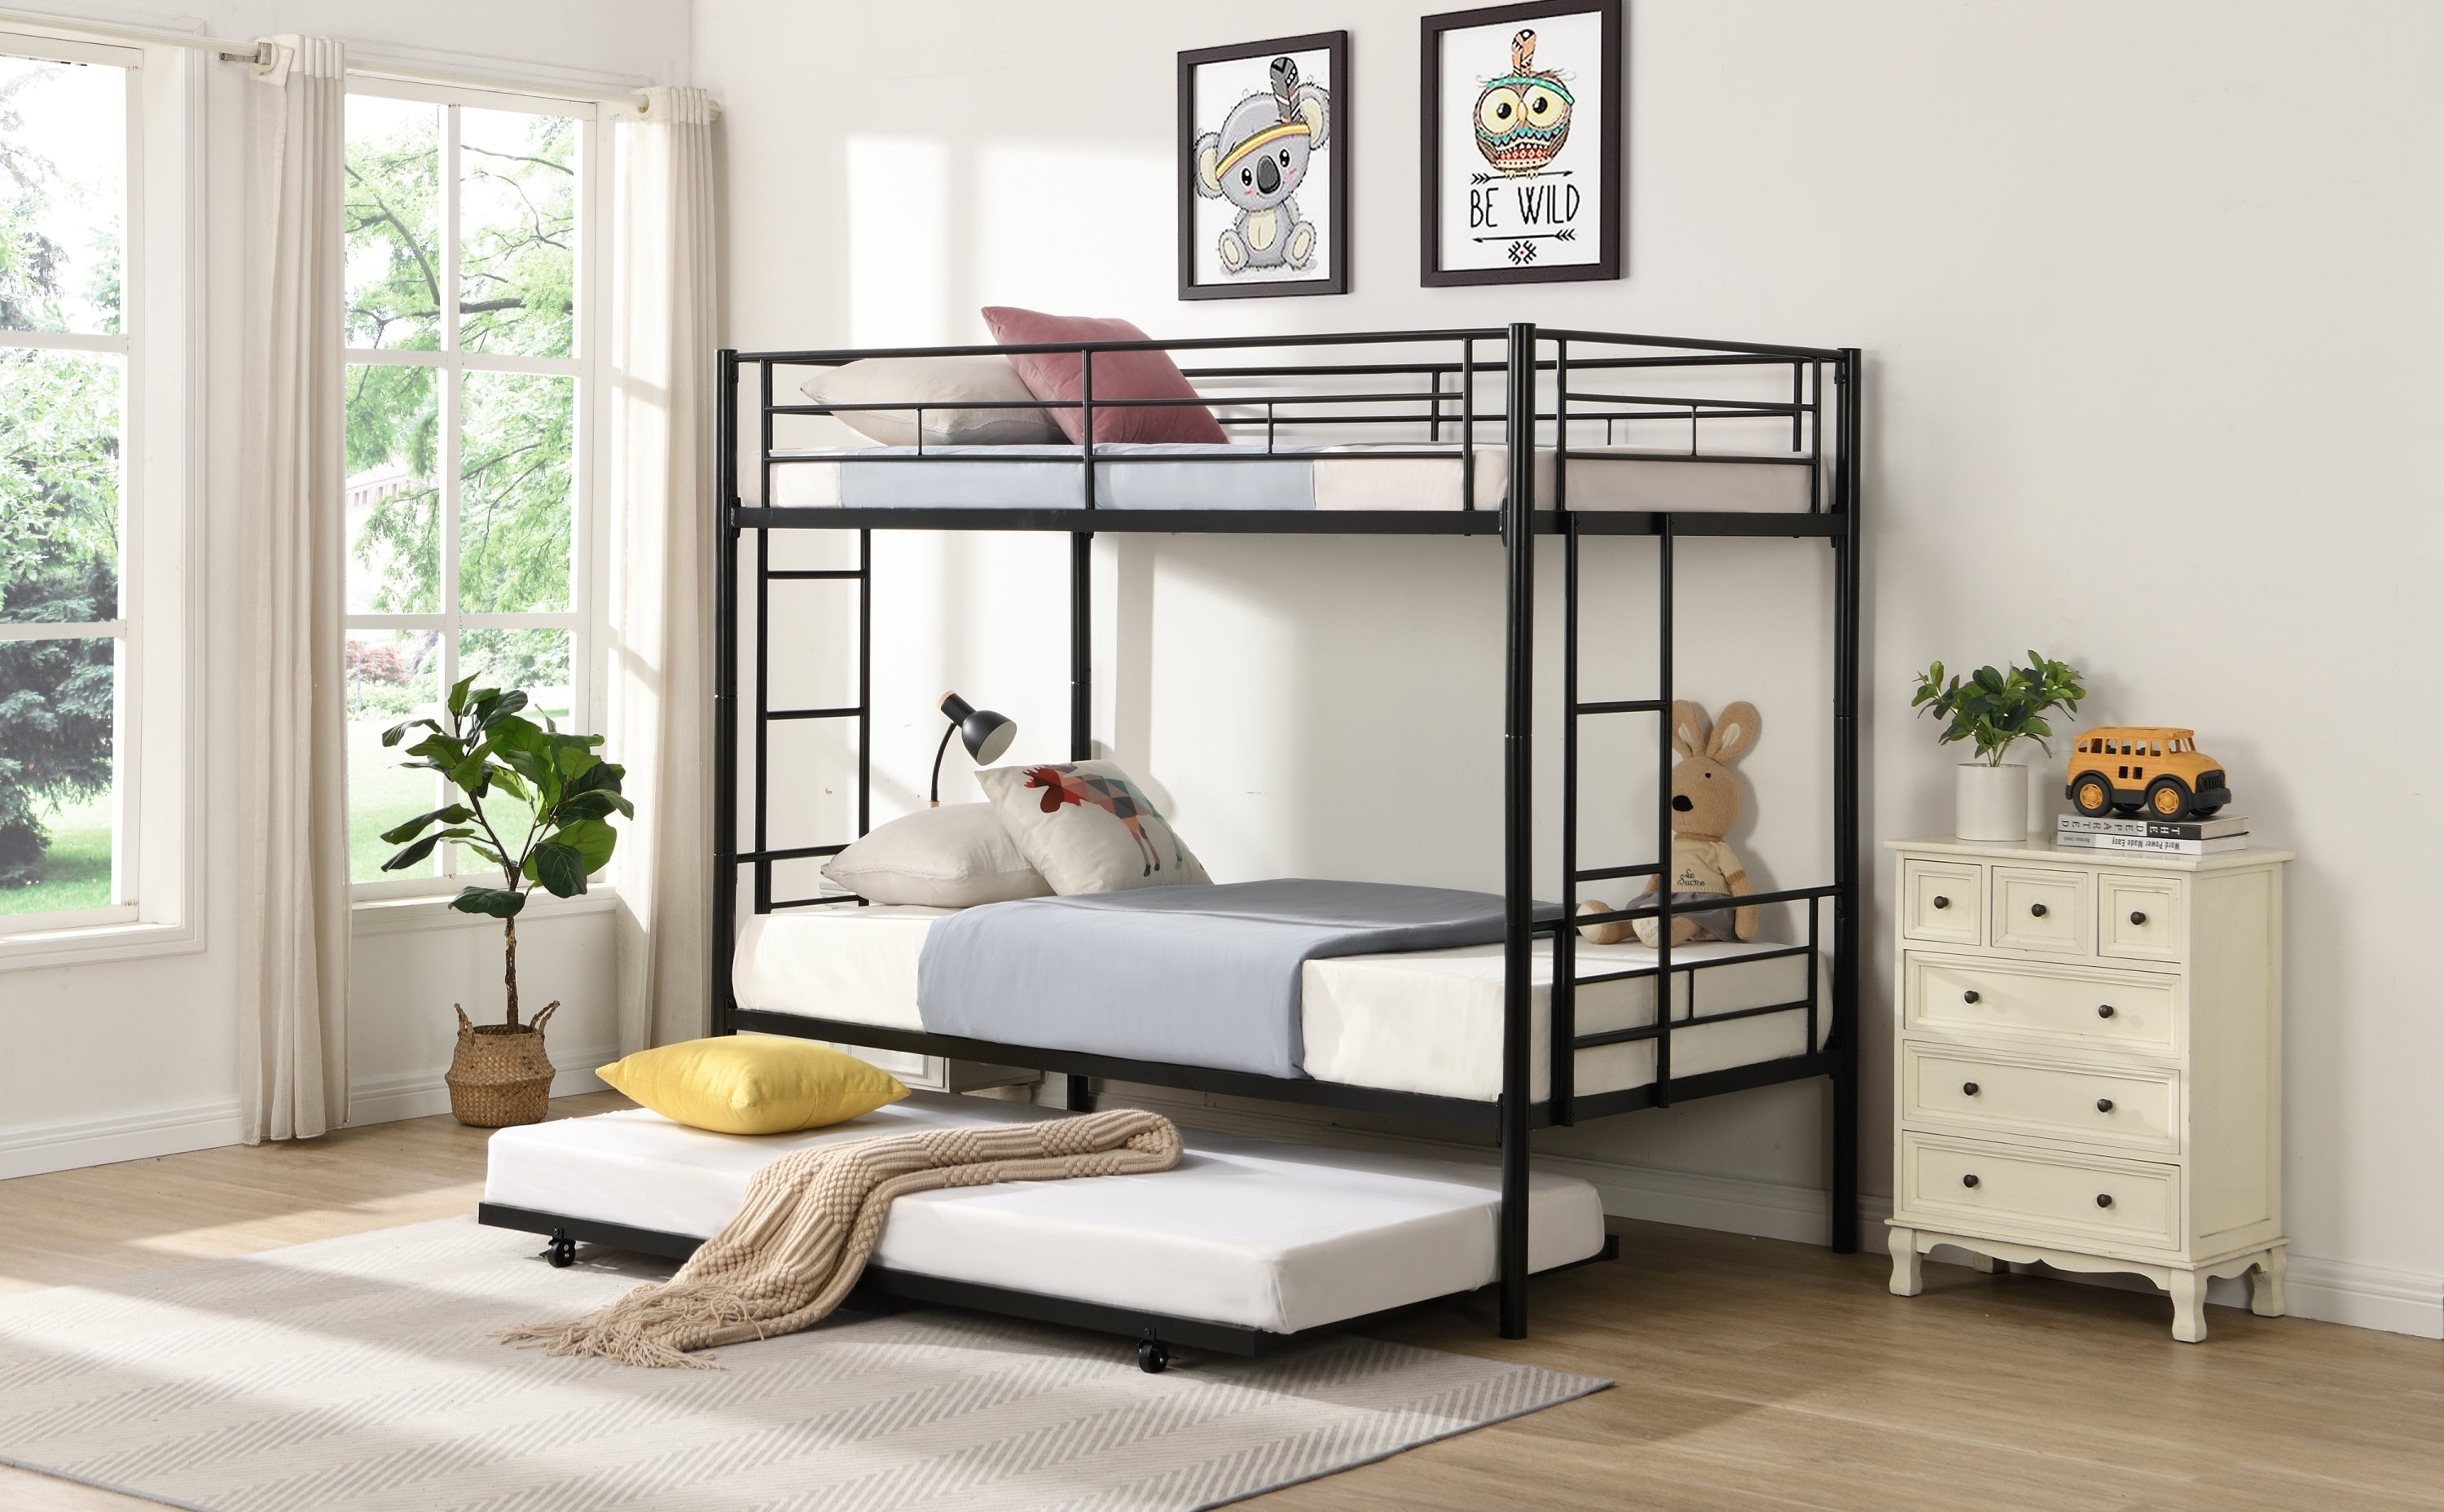 Black Metal Twin Bunk Bed with Trundle, Sturdy Guard Rail, 2 Ladders - Divisible into Two Beds - No Box Spring Needed - Noise-Free - Ideal for Kids/Adults in Dorms